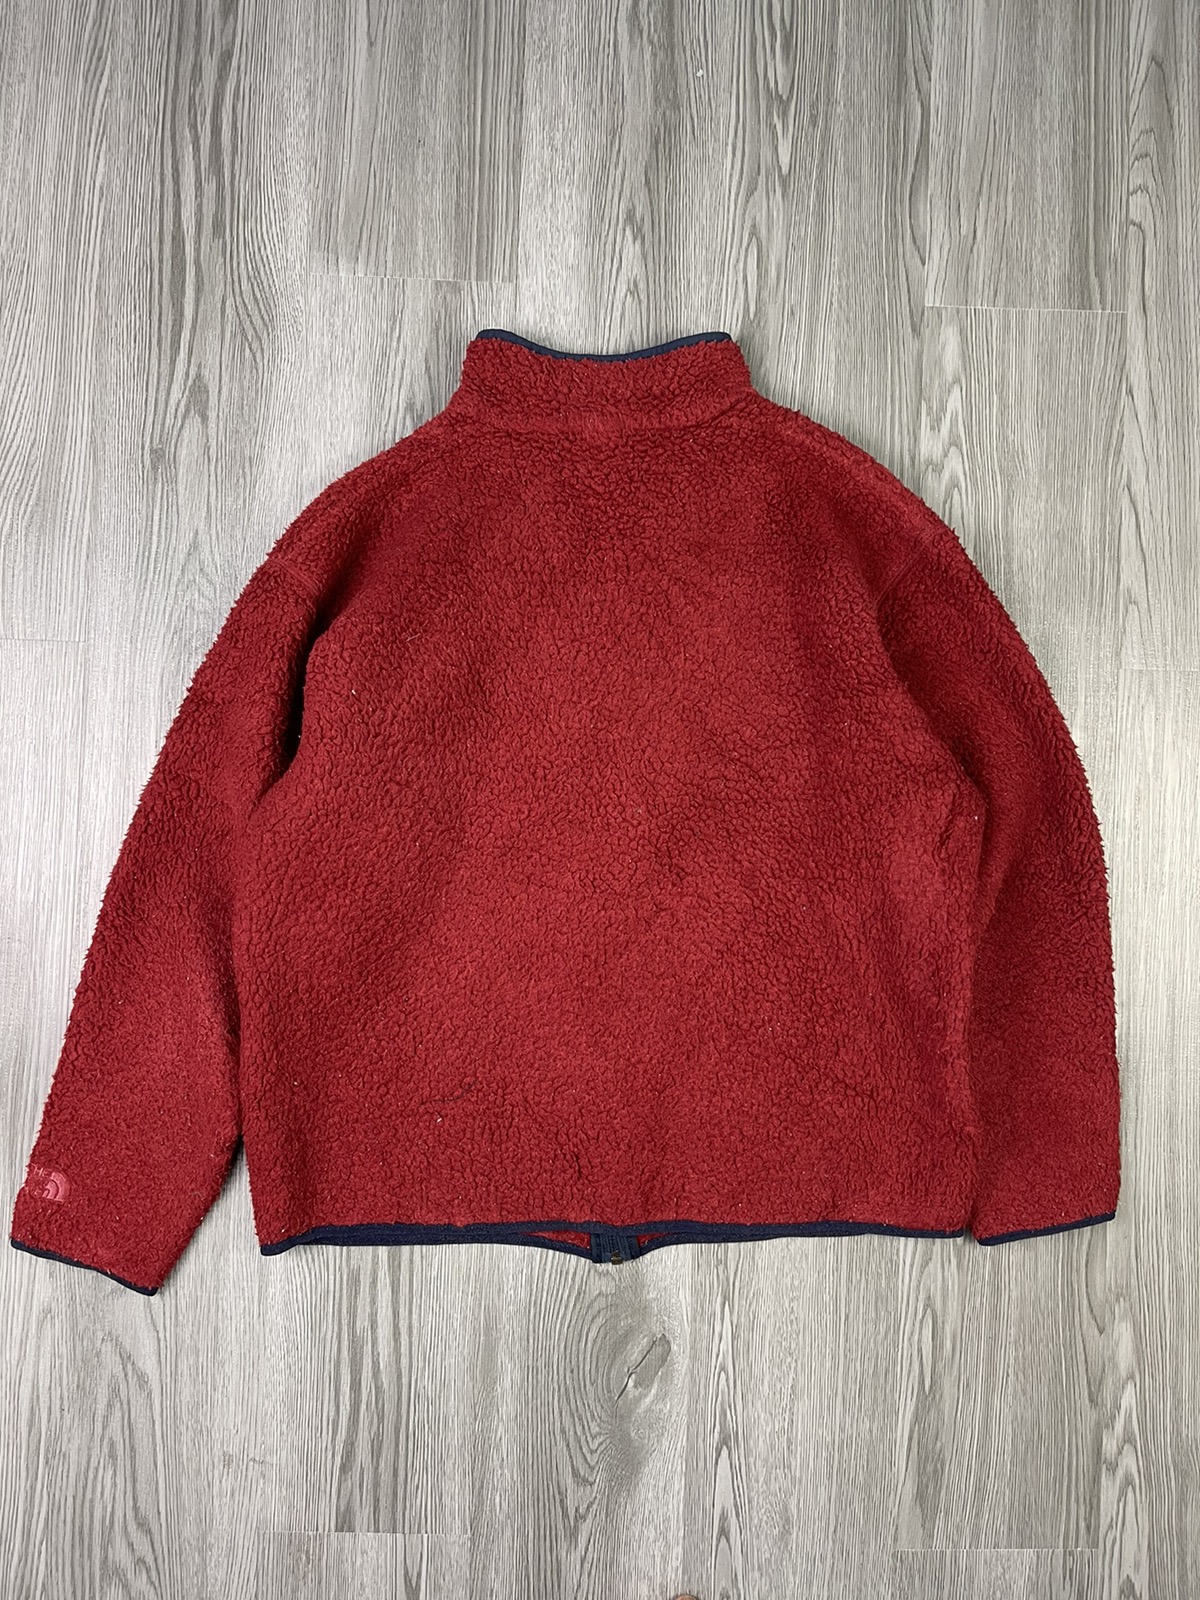 Red maroon The North Face fleece jacket - 3